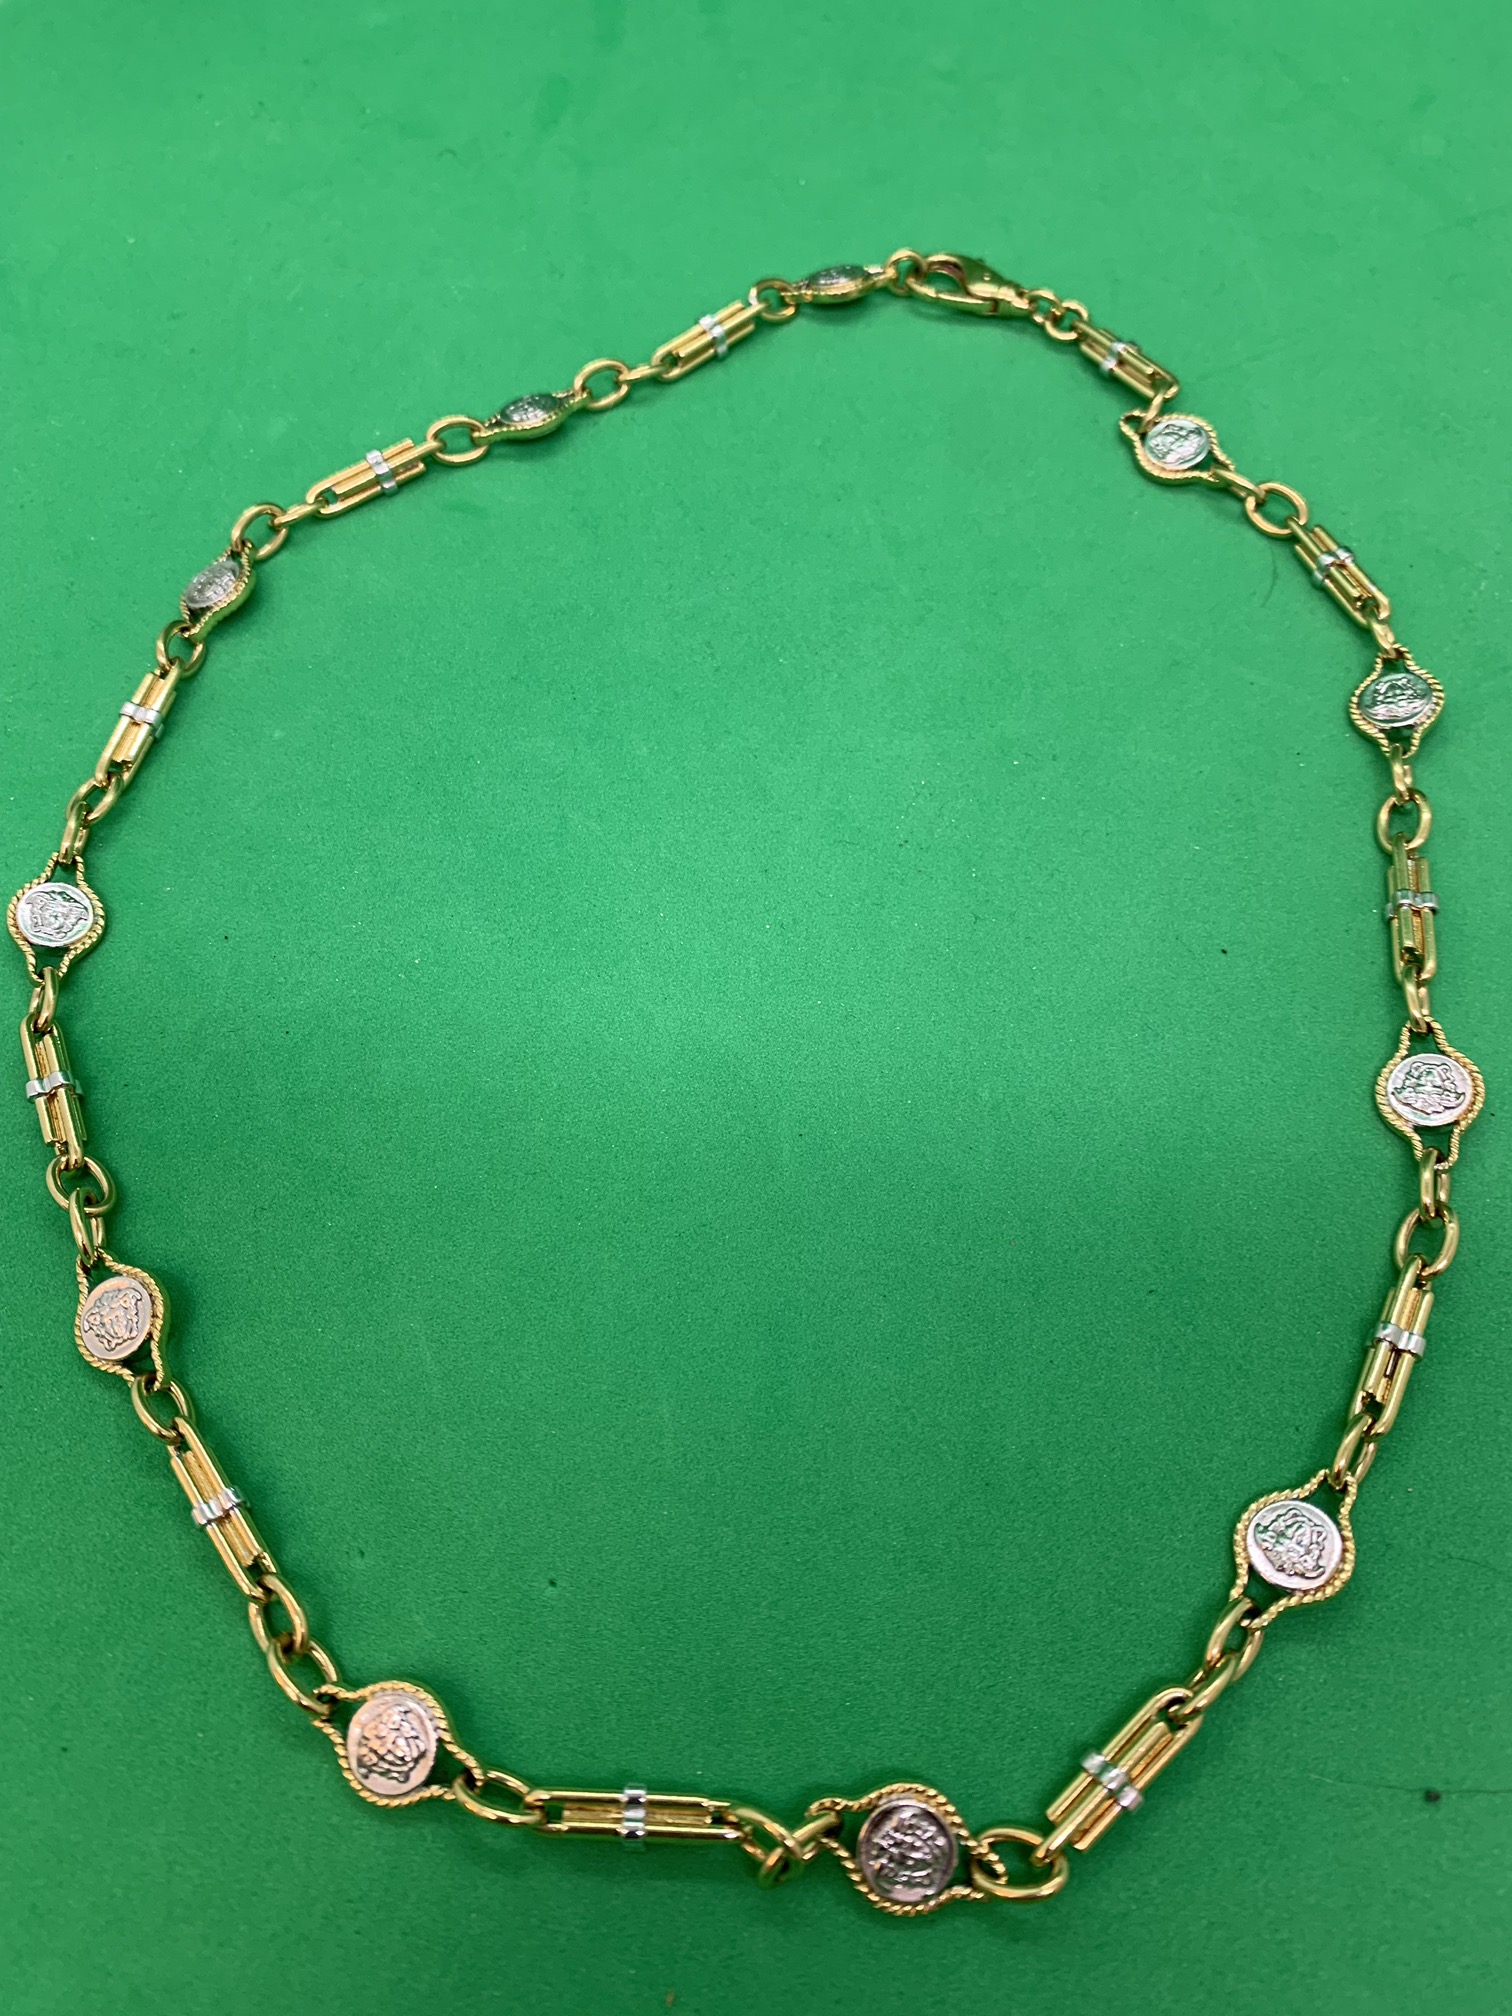 HEAVY 110 GRAMS APPROX VERSACE STYLE GOLD CHAIN - IMPRESSIVE - 24"